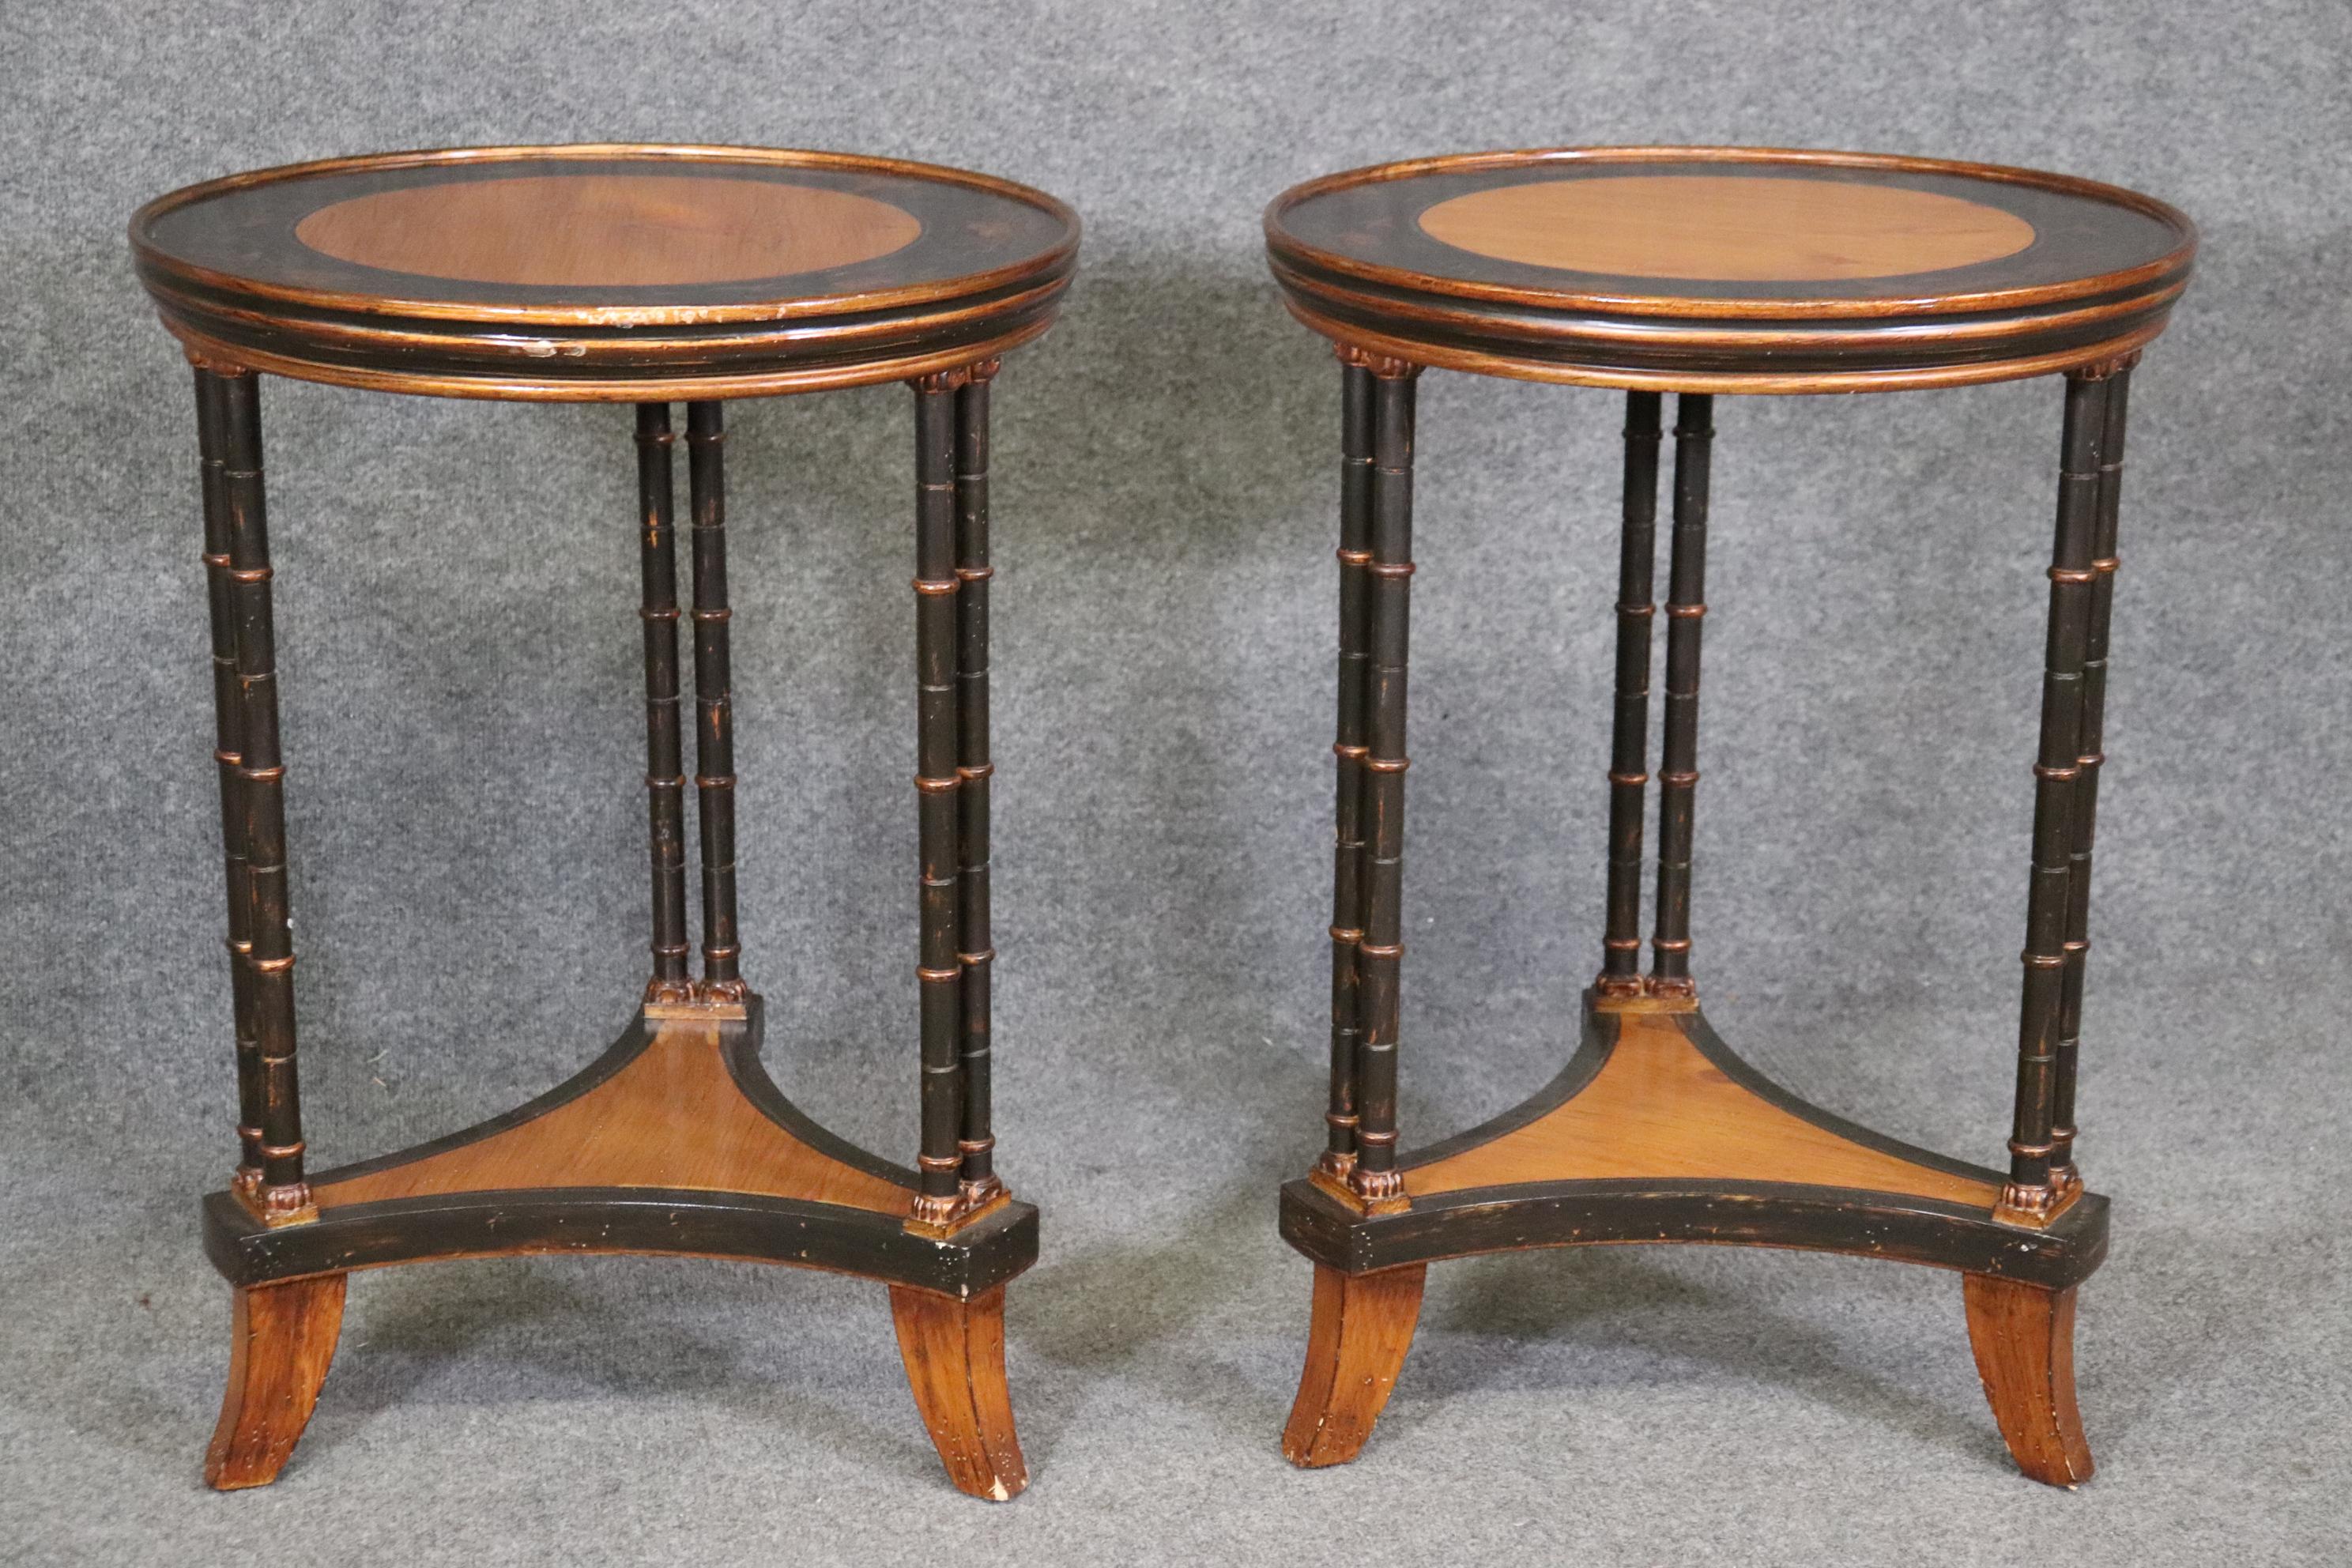 Pair of Chinoiserie Painted Faux Bamboo Yew Wood Gueridon Side Tables  For Sale 2